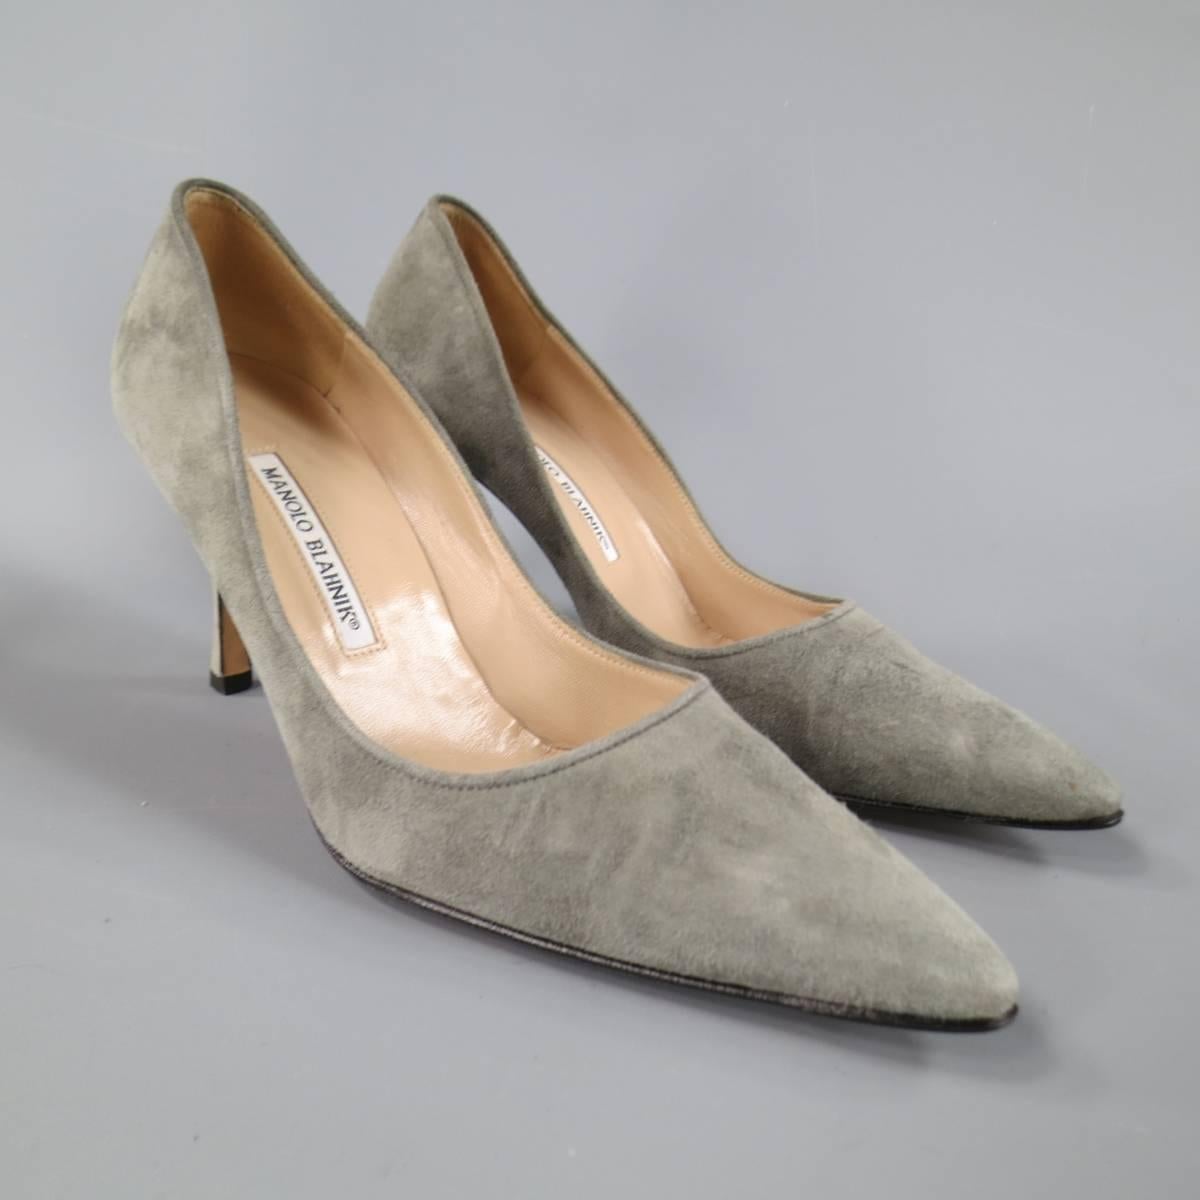 Classic MANOLO BLAHNIK pumps in a gray suede featuring a pointed toe and covered stiletto heel. Wear throughout suede. Made in Italy.
 
Good Pre-Owned Condition.
Marked: IT 38
 
Heel: 3.5 in.